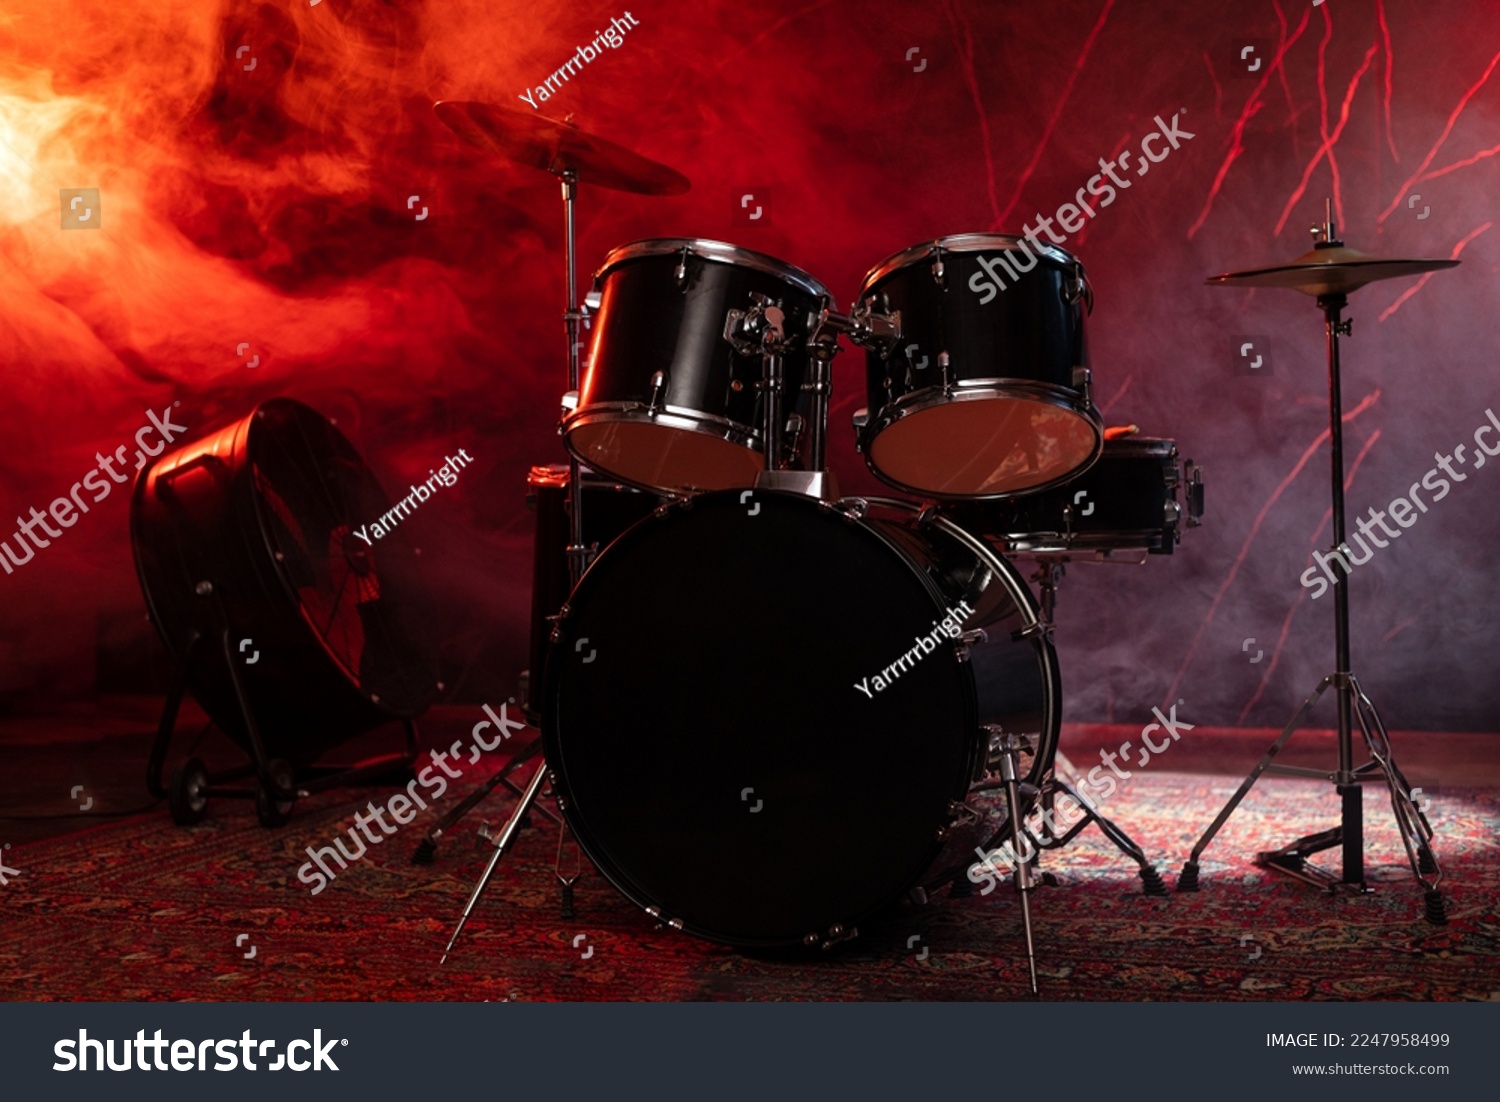 Drums and drum set. Beautiful blue and red background, with rays of light. Beautiful special effects of smoke and lighting. Musical instrument. The concept of music. Close-up photo. #2247958499